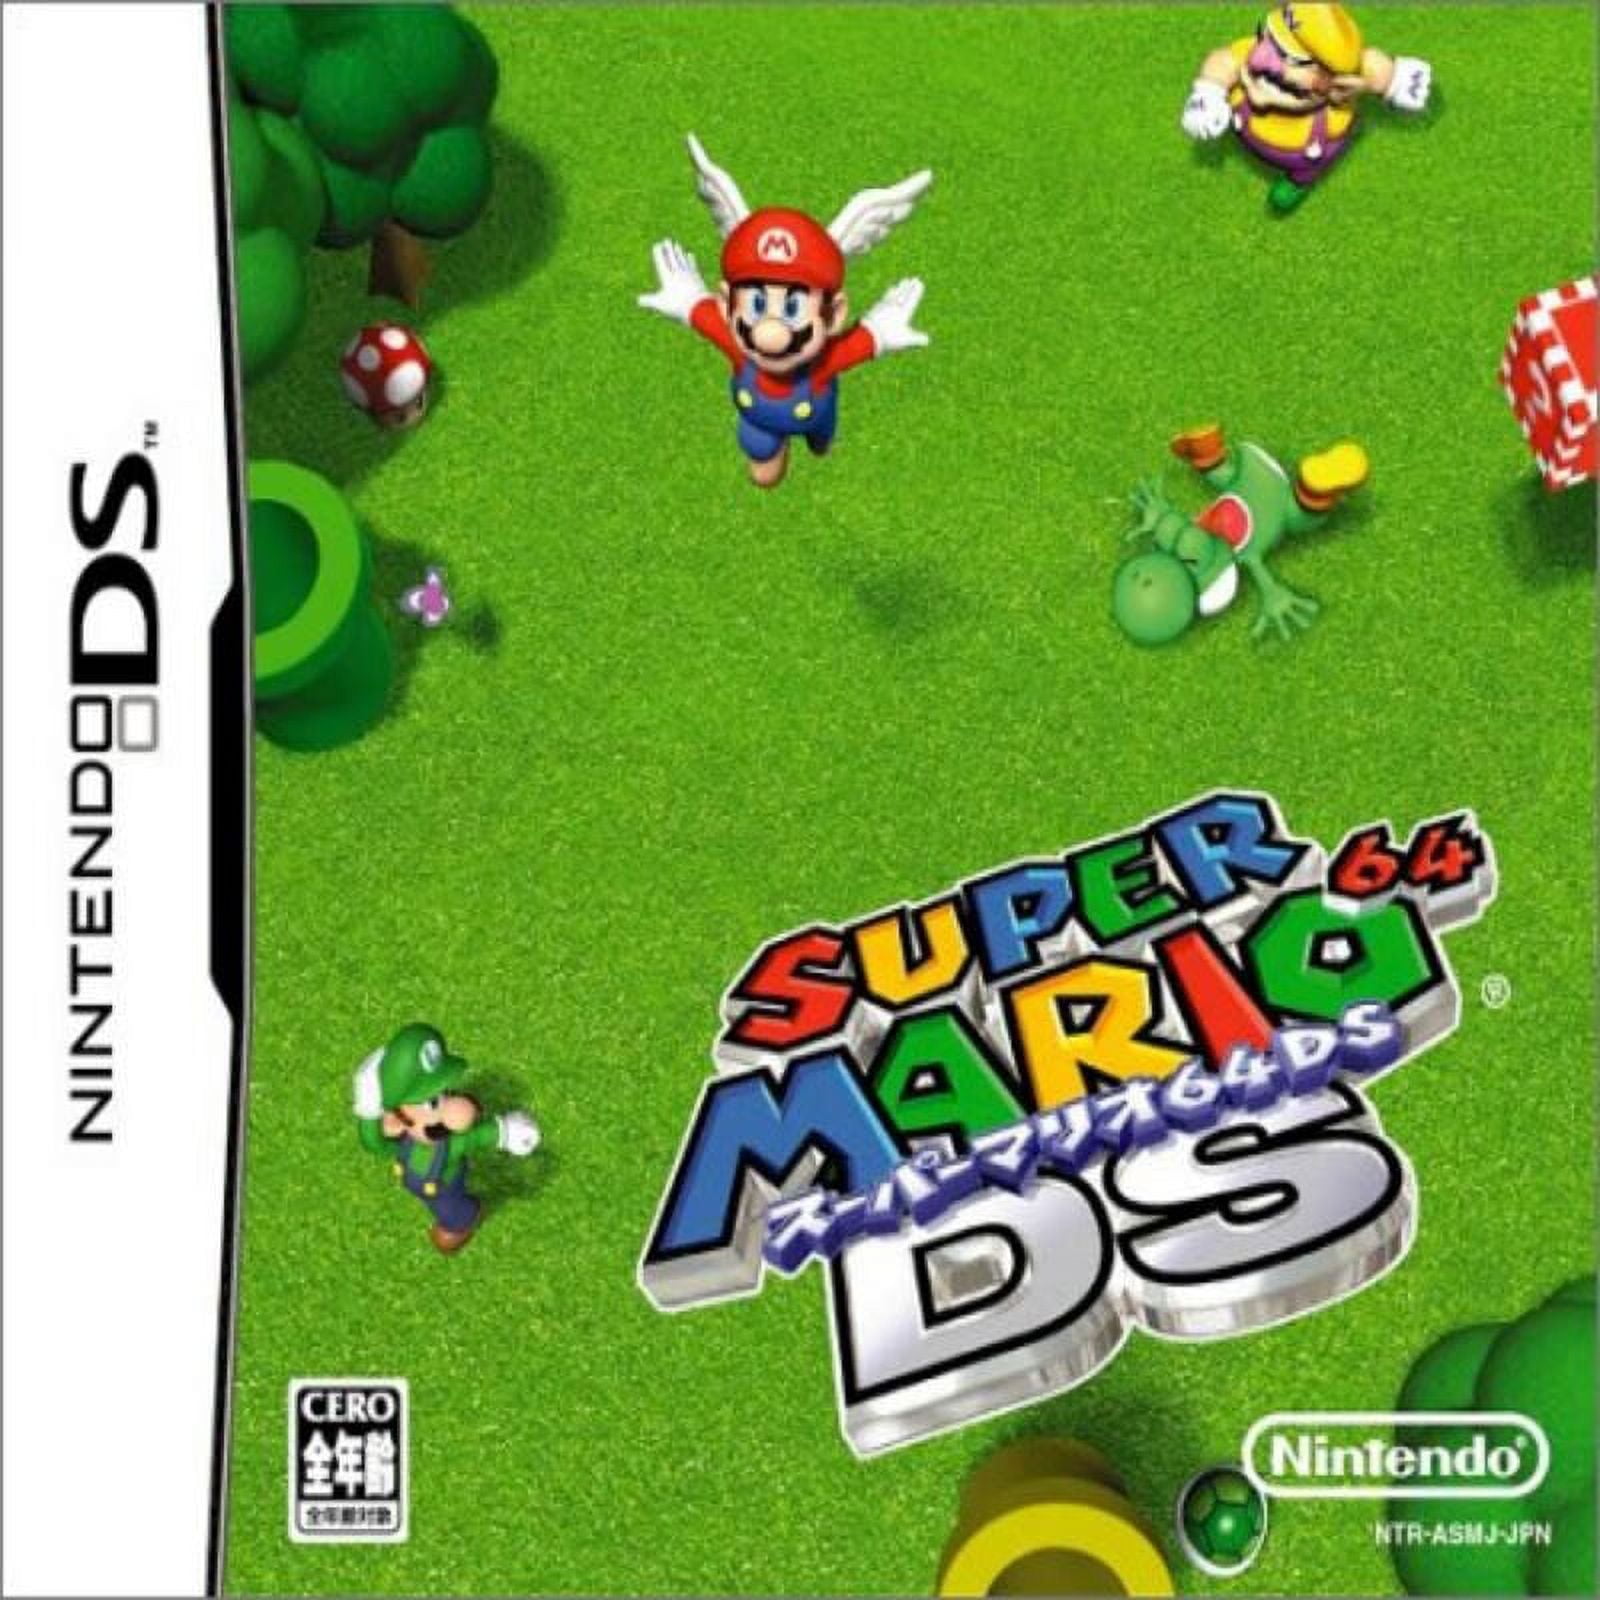 Super Mario 64 DS game for Nintendo DS / DS Lite / DSi w box graphics,  booklet